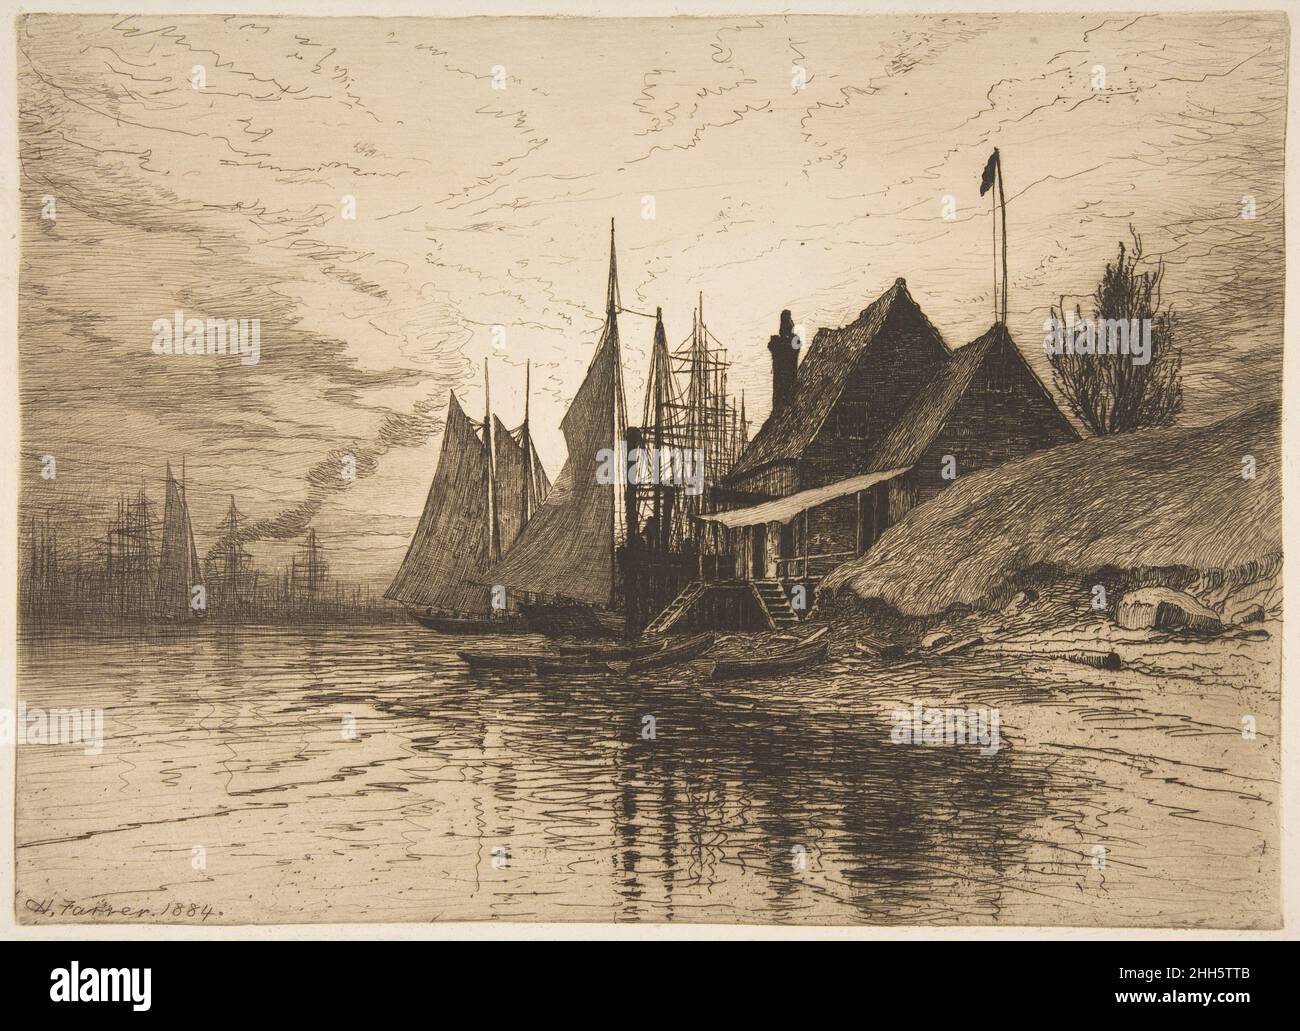 Evening, New York Harbor 1884 Henry Farrer American. Evening, New York Harbor  381008 Artist: Henry Farrer, American, London 1844?1903 New York, Evening, New York Harbor, 1884, Etching, Plate: 9 3/4 ? 13 7/16 in. (24.7 ? 34.2 cm) Sheet: 14 1/16 x 18 1/8 in. (35.7 x 46.1 cm). The Metropolitan Museum of Art, New York. The Edward W. C. Arnold Collection of New York Prints, Maps and Pictures, Bequest of Edward W. C. Arnold, 1954 (54.90.946) Stock Photo